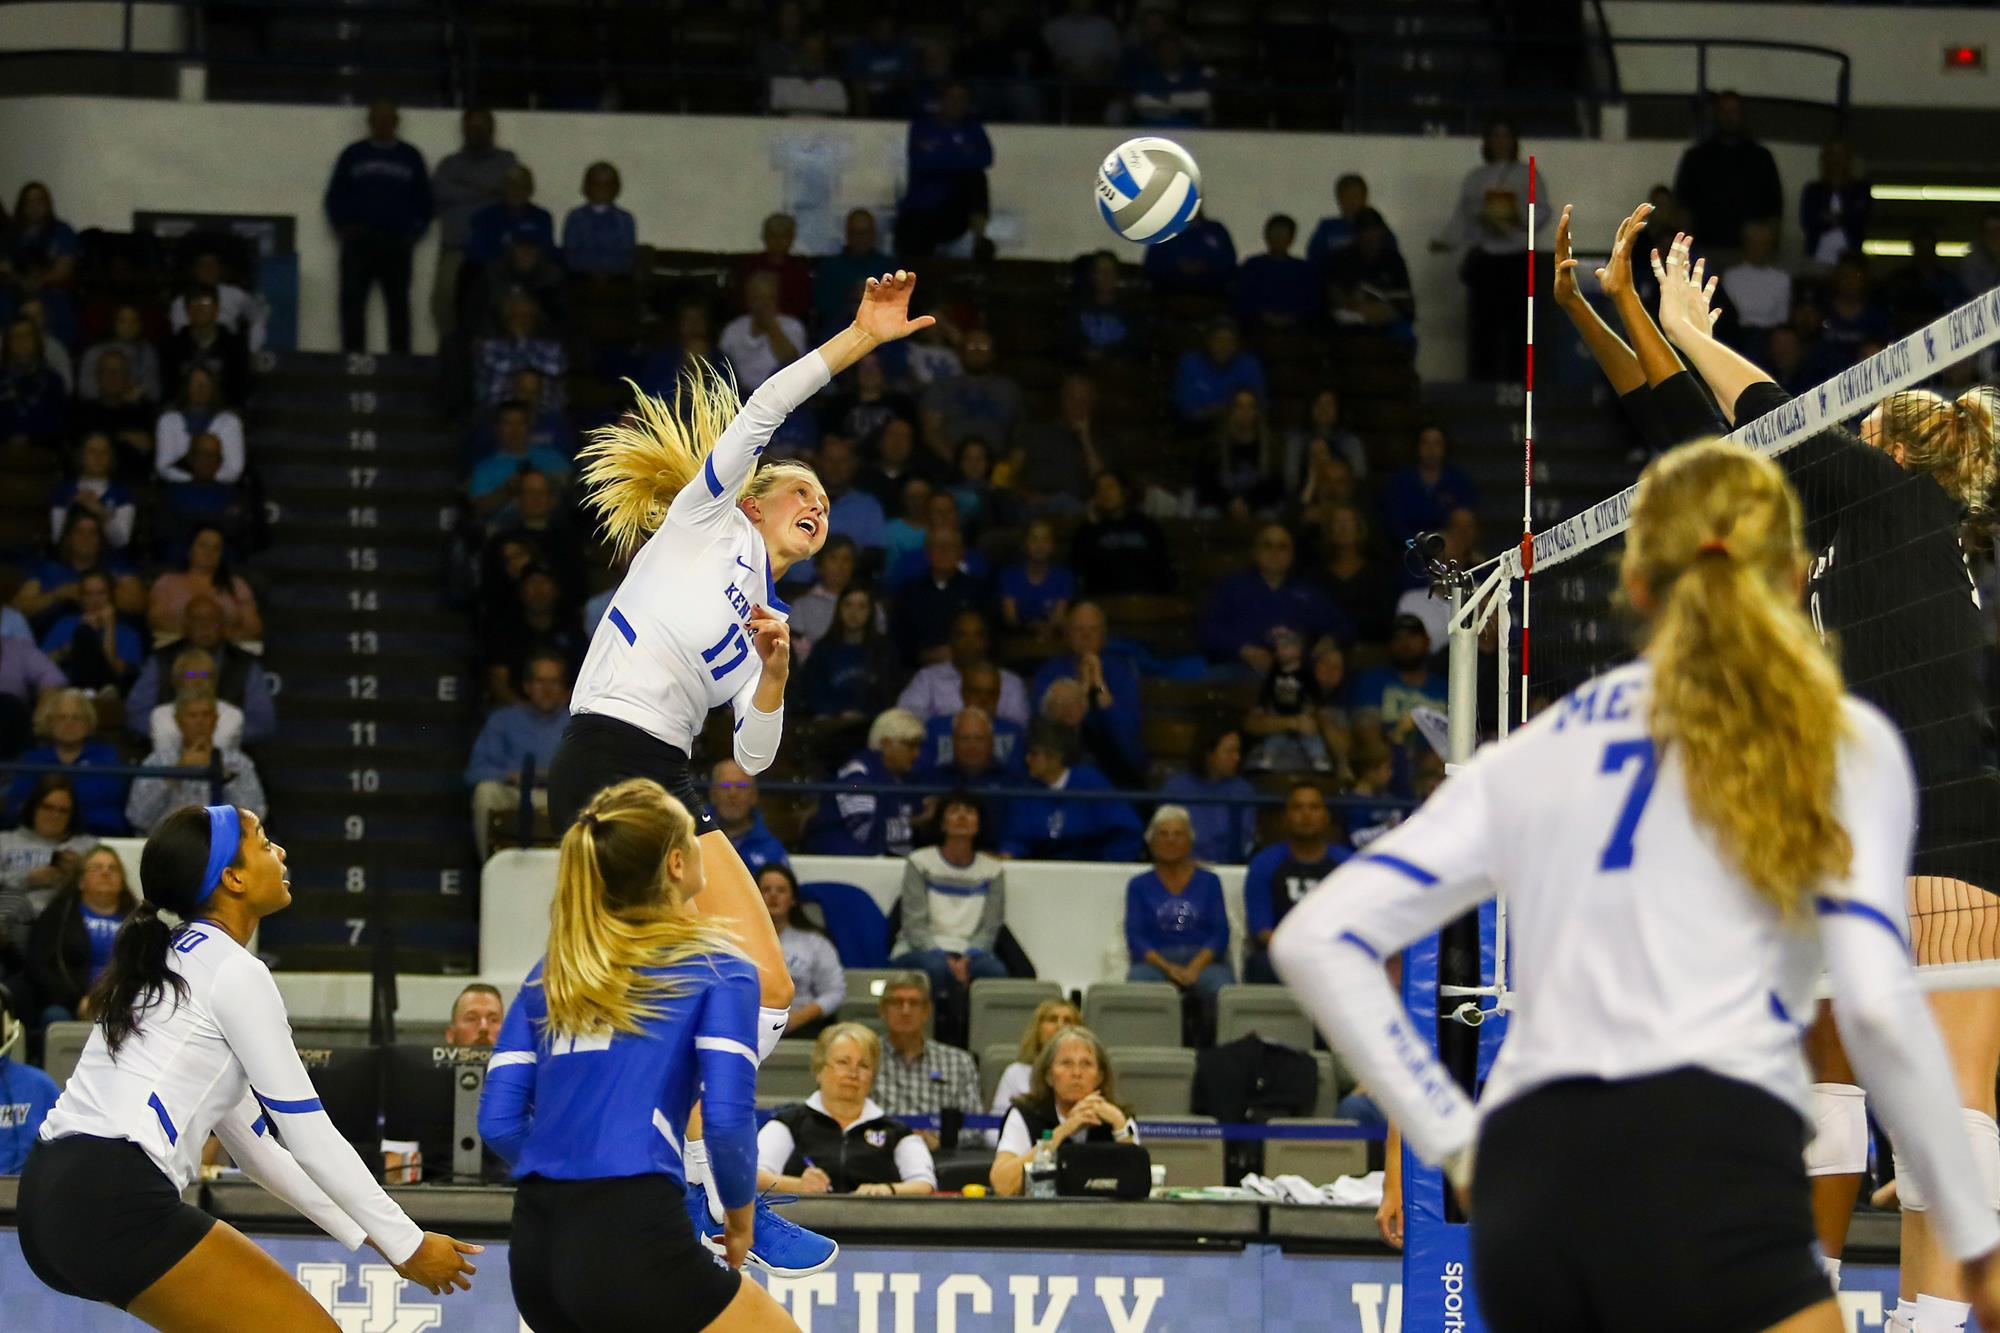 Stumler and Curry Lead Kentucky to Road Win at LSU